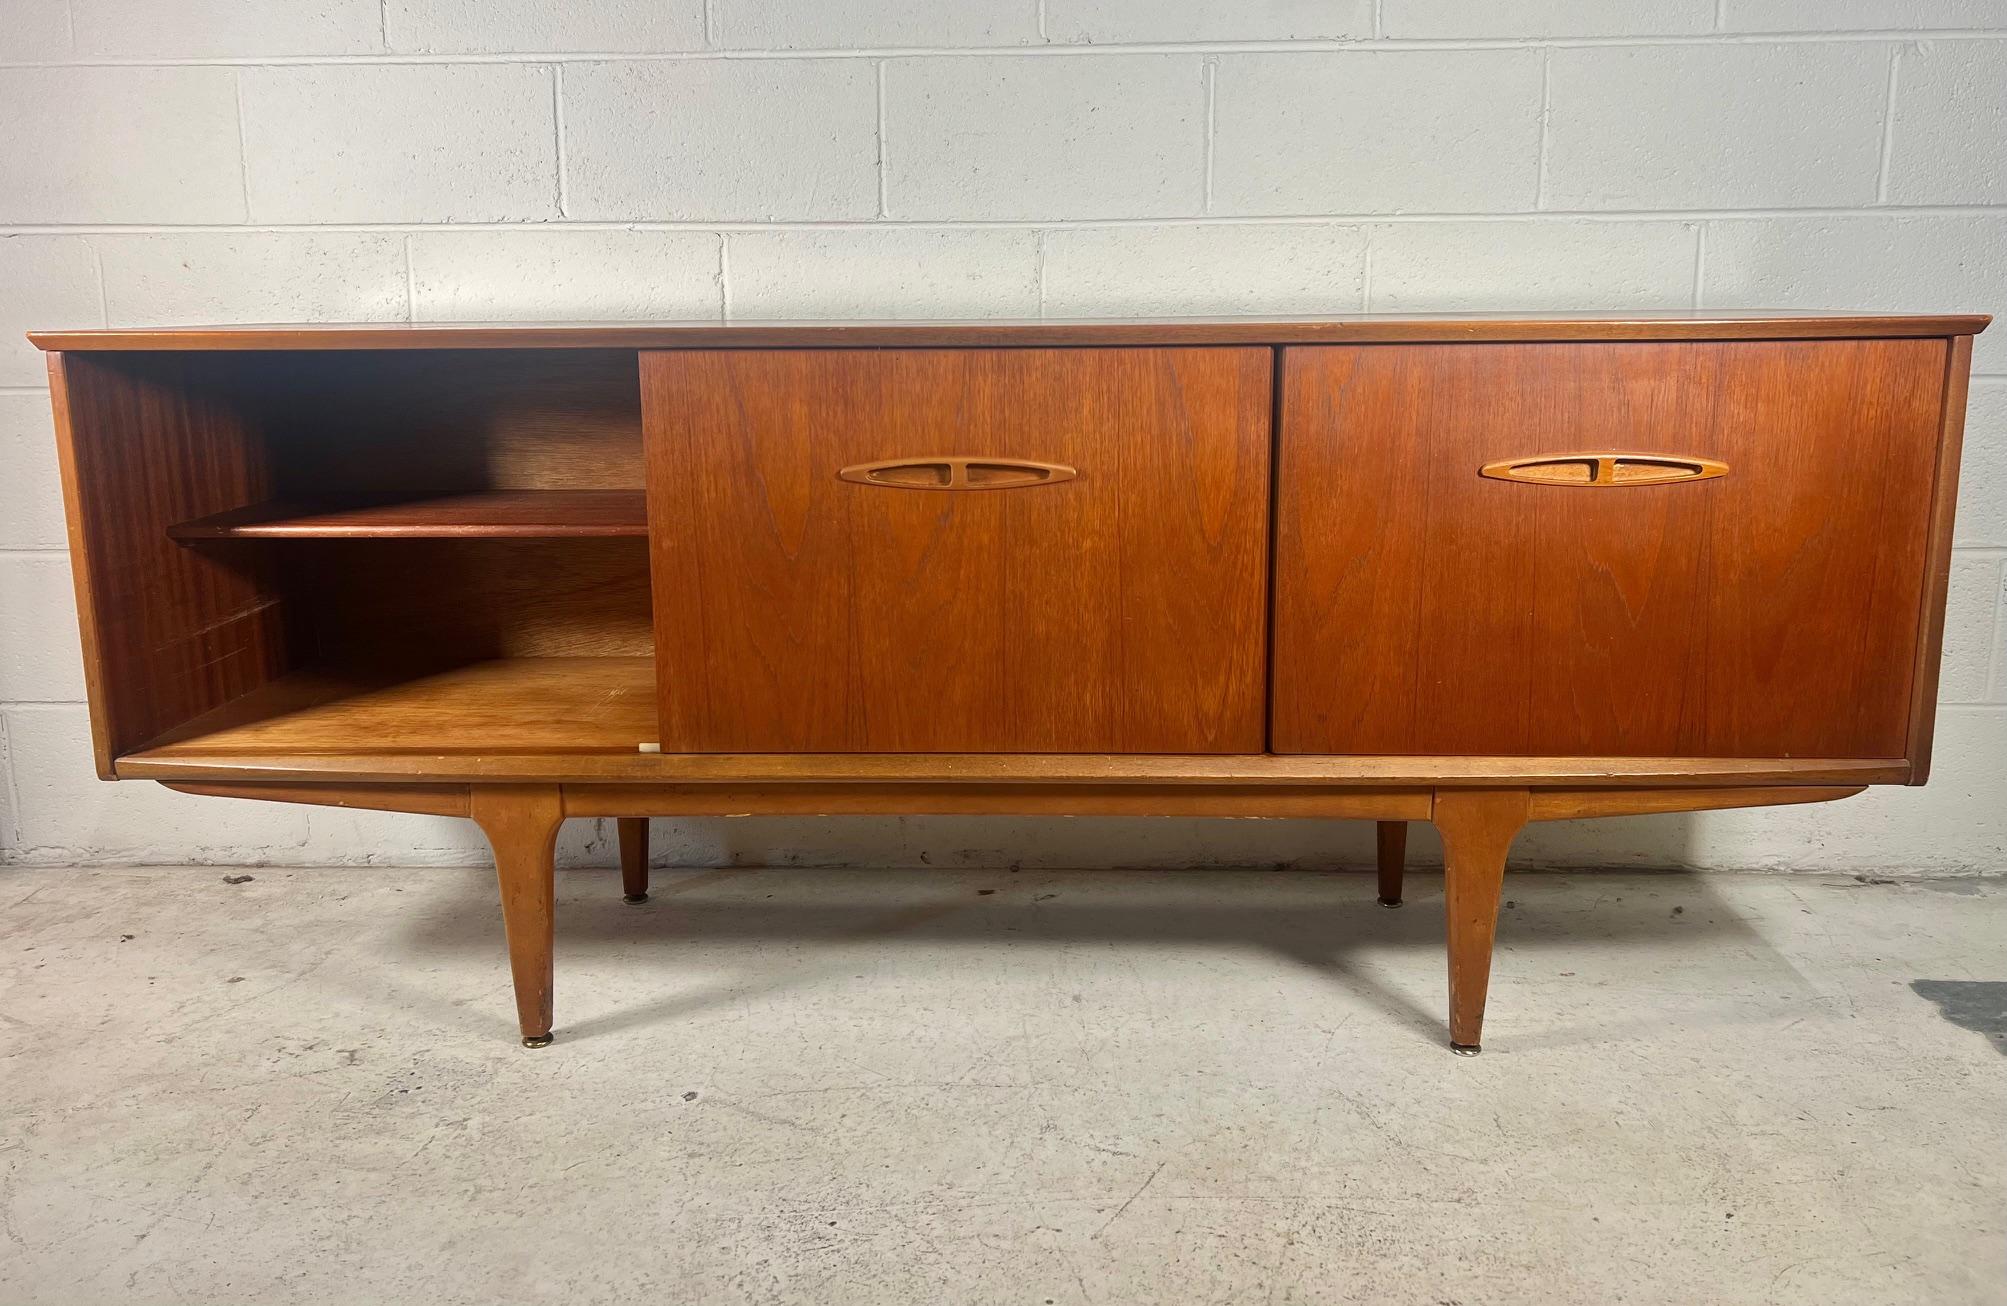 1960's teak veneer credenza with stained beech legs and handles by Jentique. Made in England. Original label in top drawer.

Three drawers in the middle flanked by sliding door cabinets with a shelf on either side. Top drawer has the original green